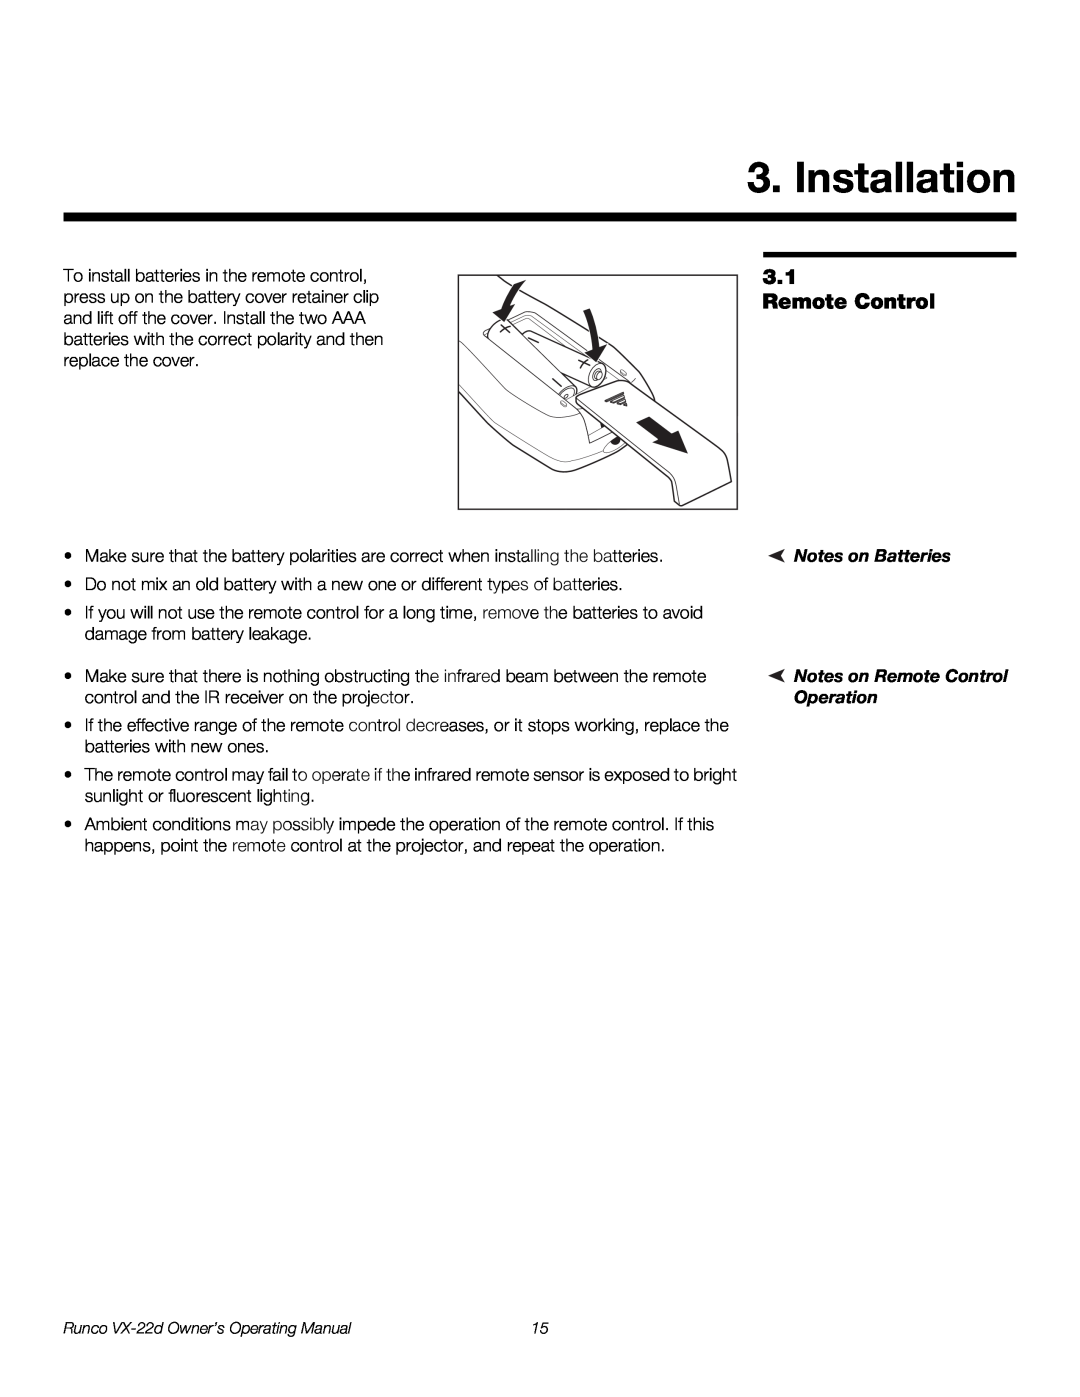 Runco VX-22D manual Installation, Notes on Batteries Notes on Remote Control Operation 